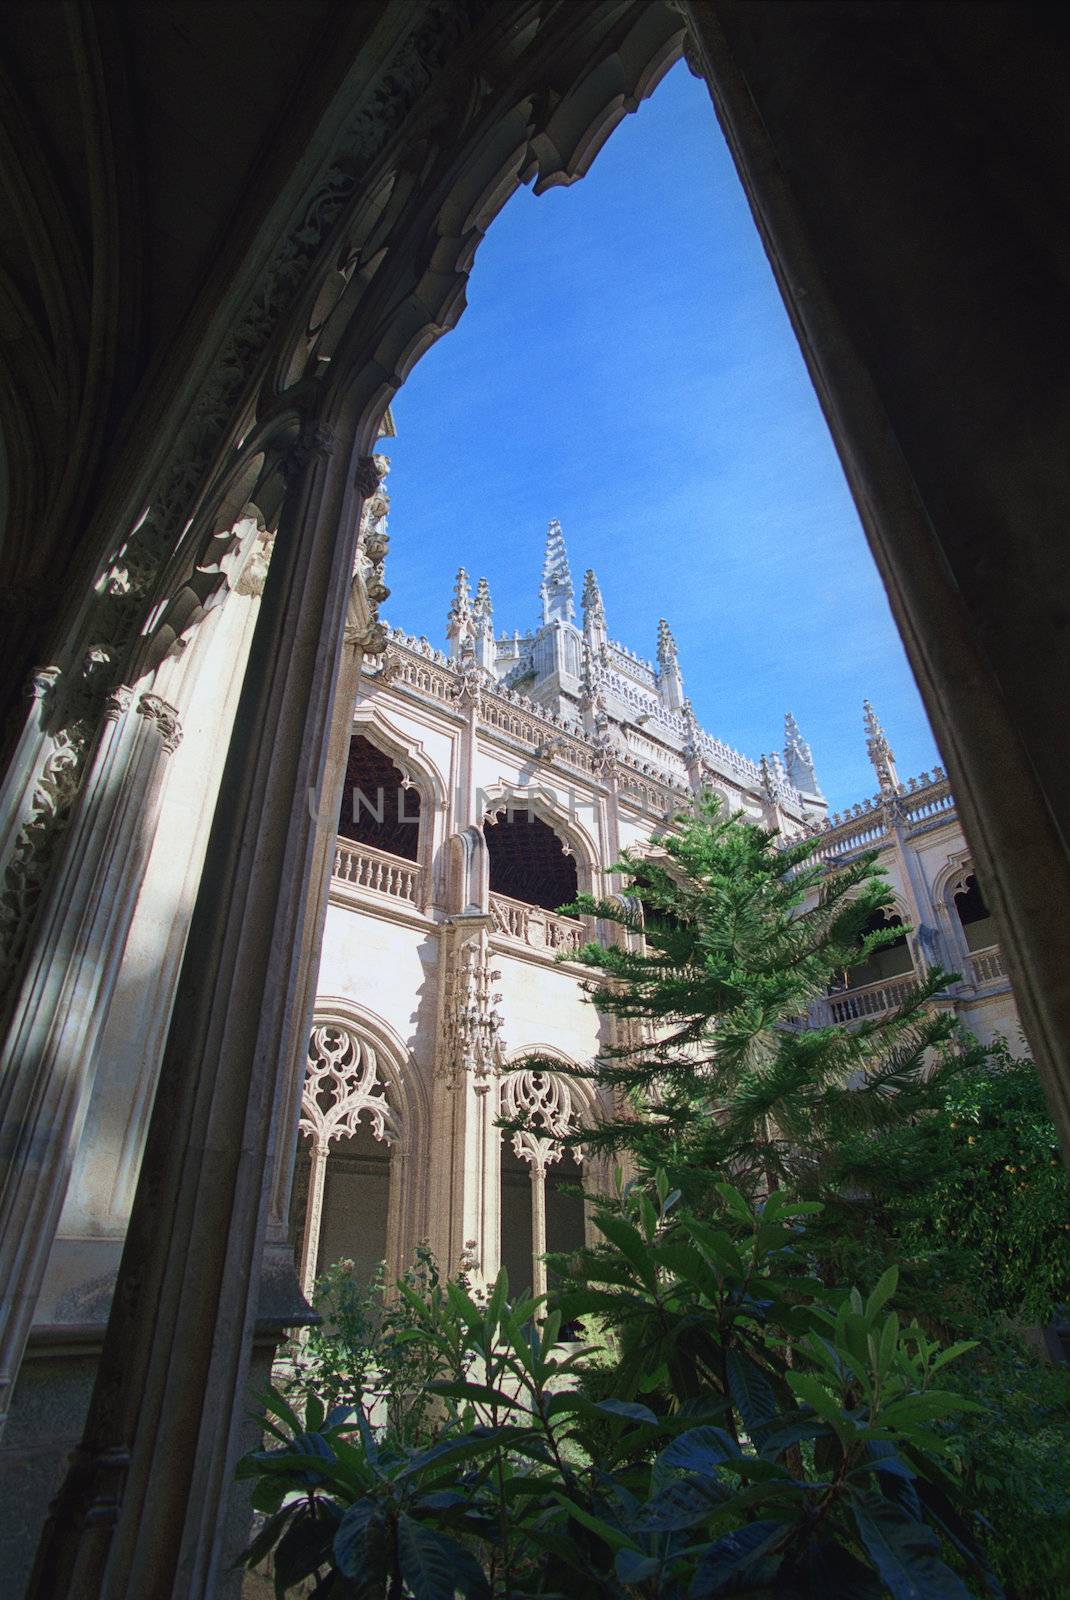 Cathedral in Toledo Spain by hotflash2001